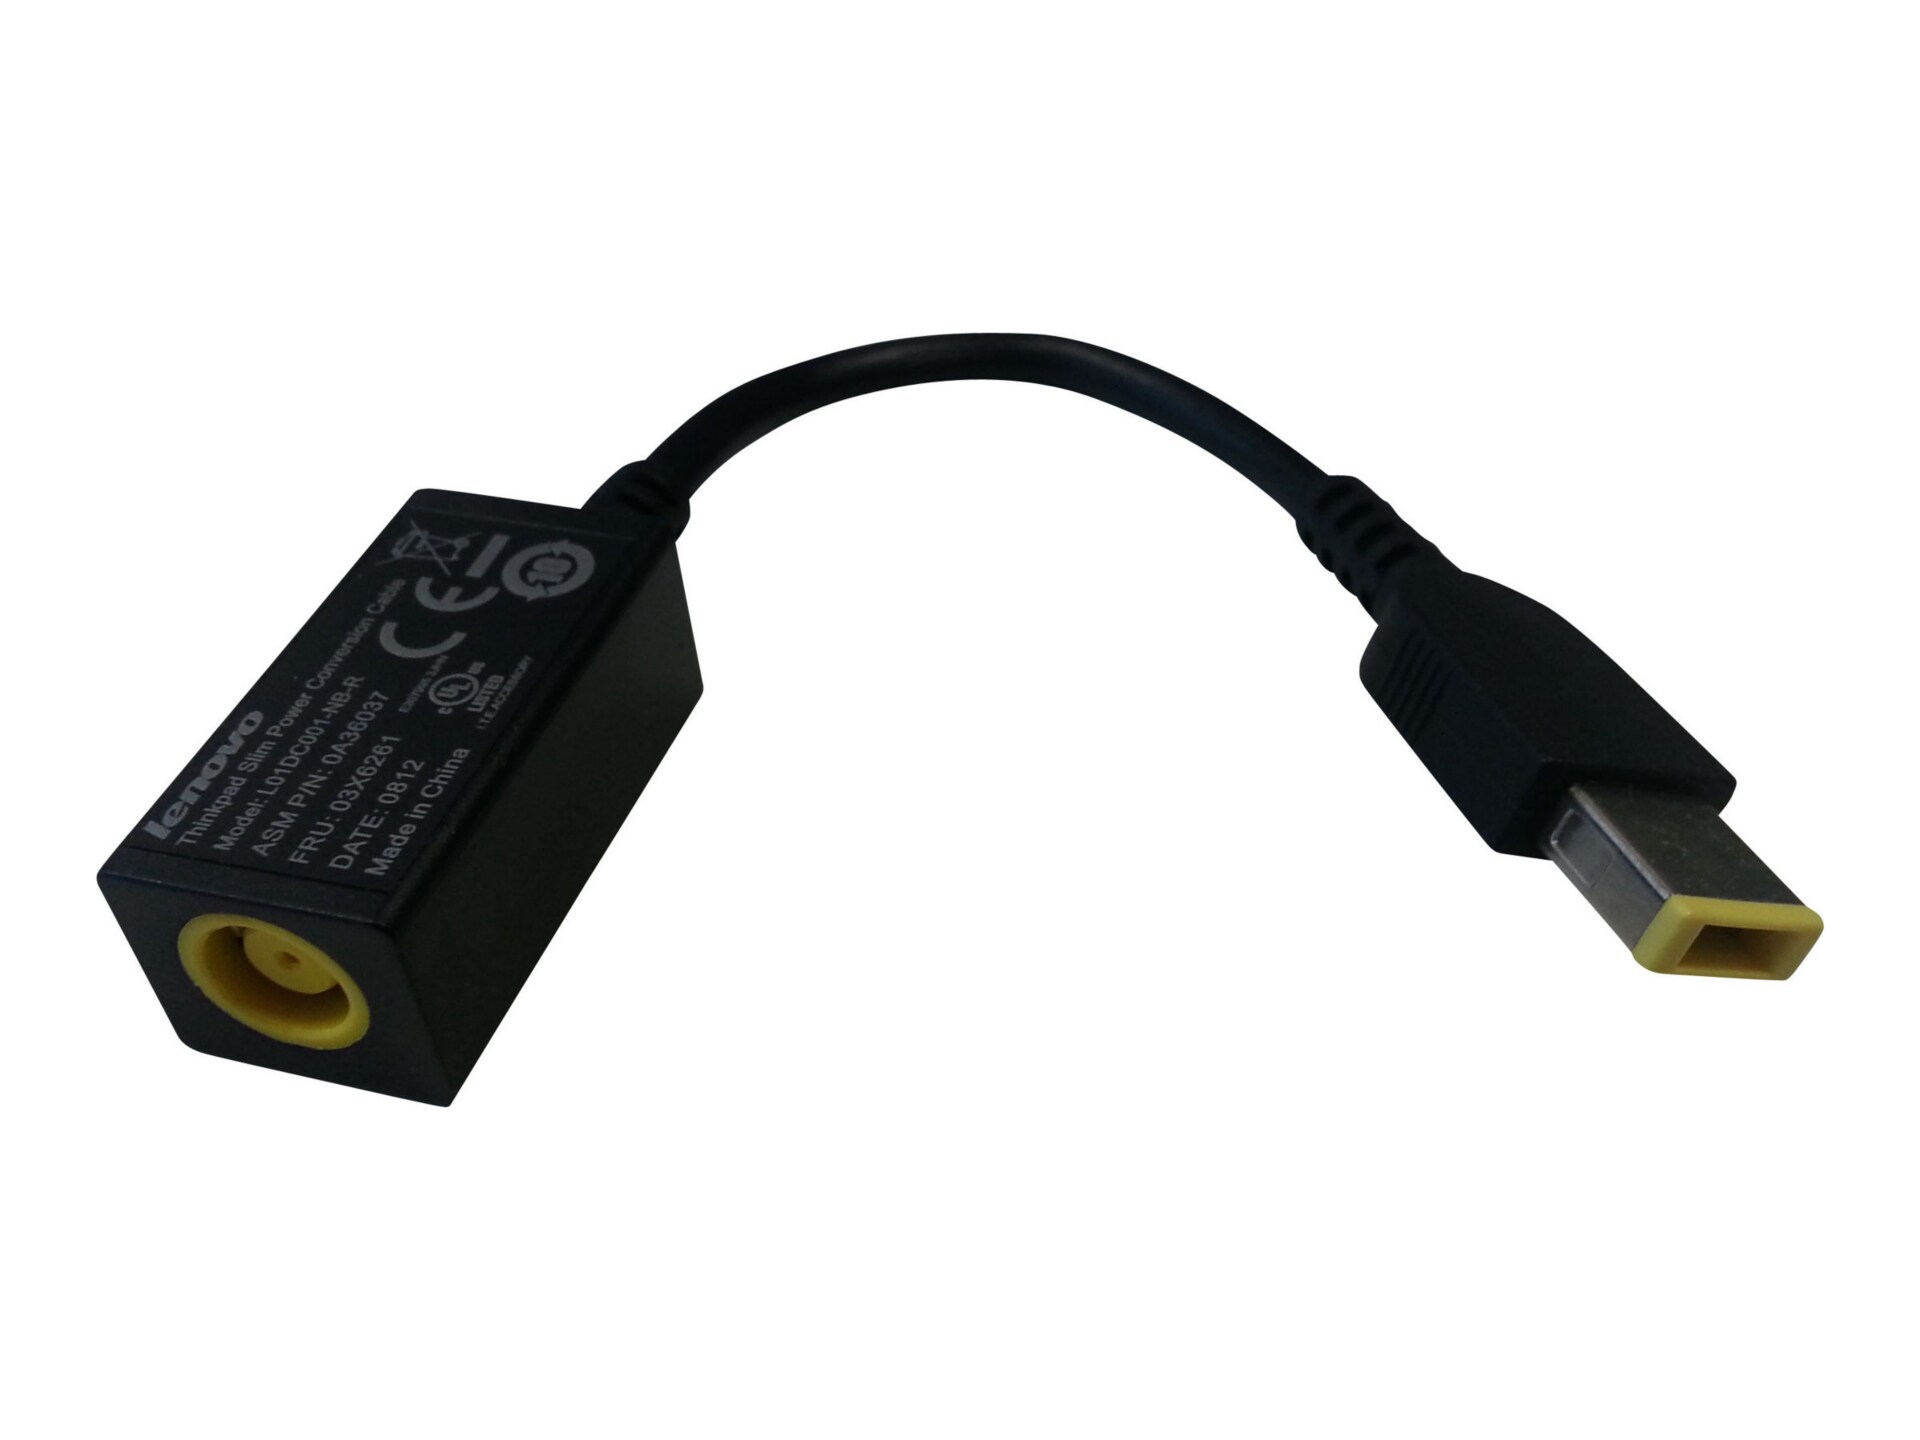 Lenovo ThinkPad Slim Power Conversion Cable - power cable